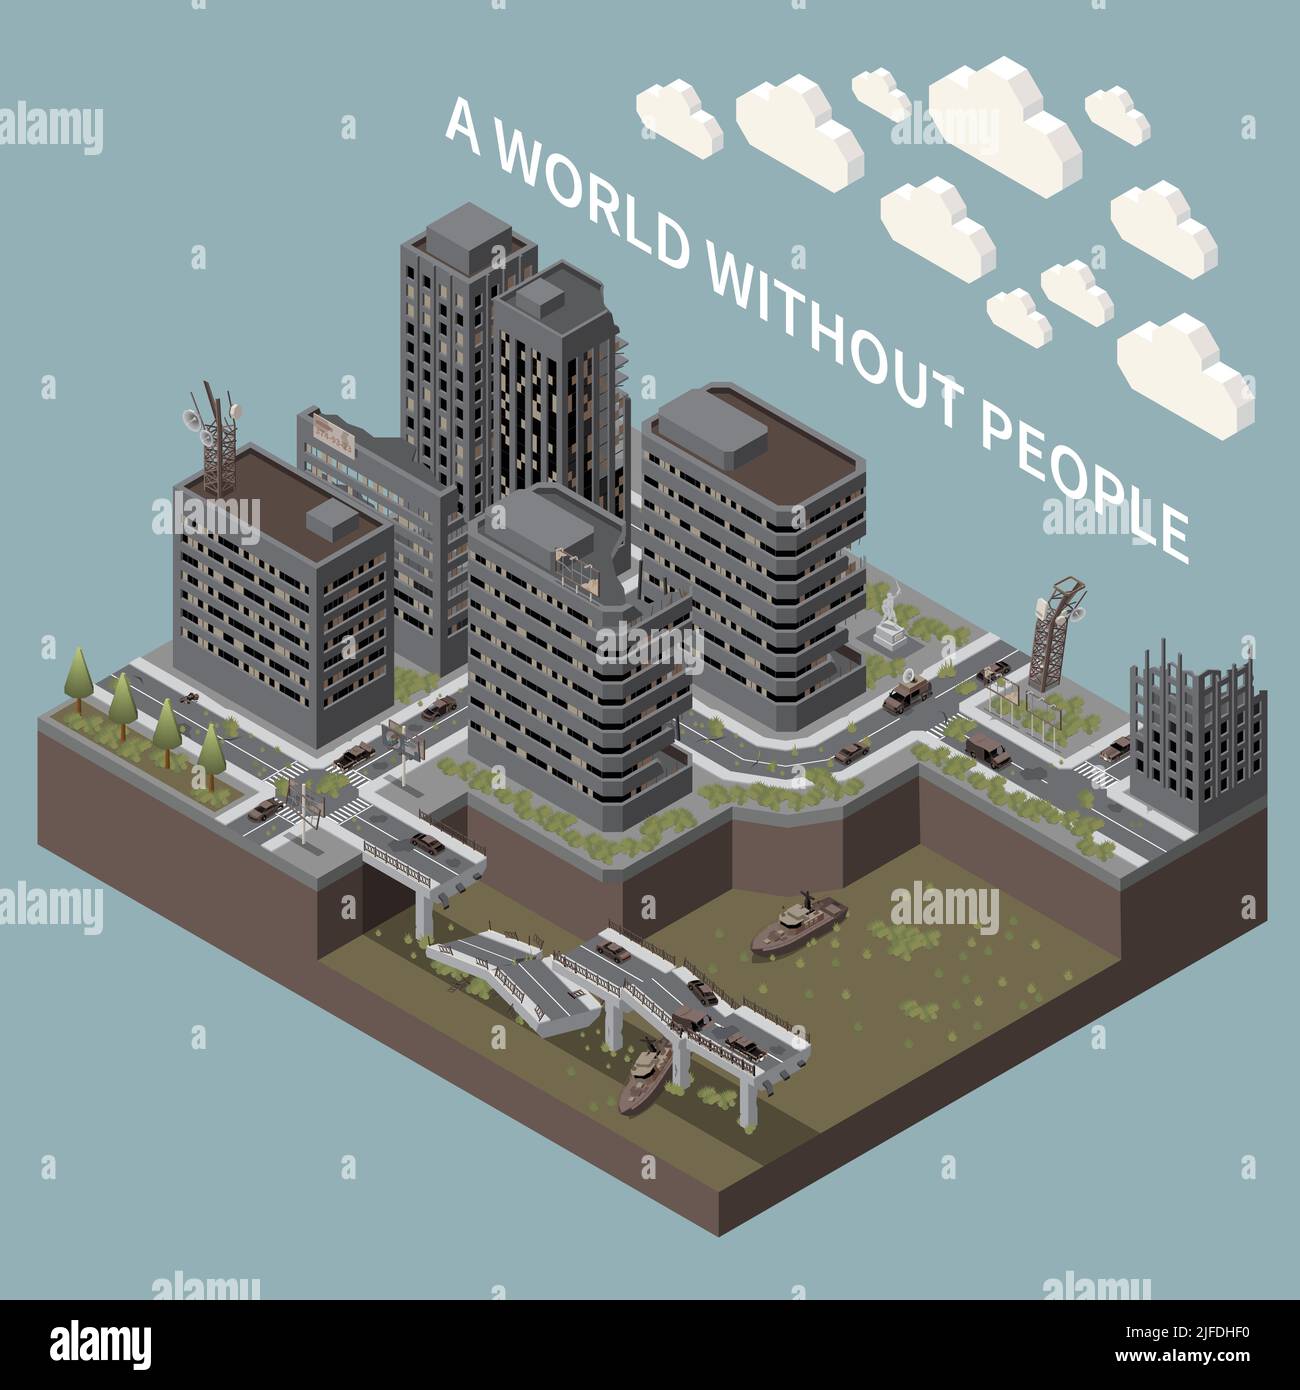 Post apocalypse isometric poster illustrated city landscape and transport without people vector illustration Stock Vector